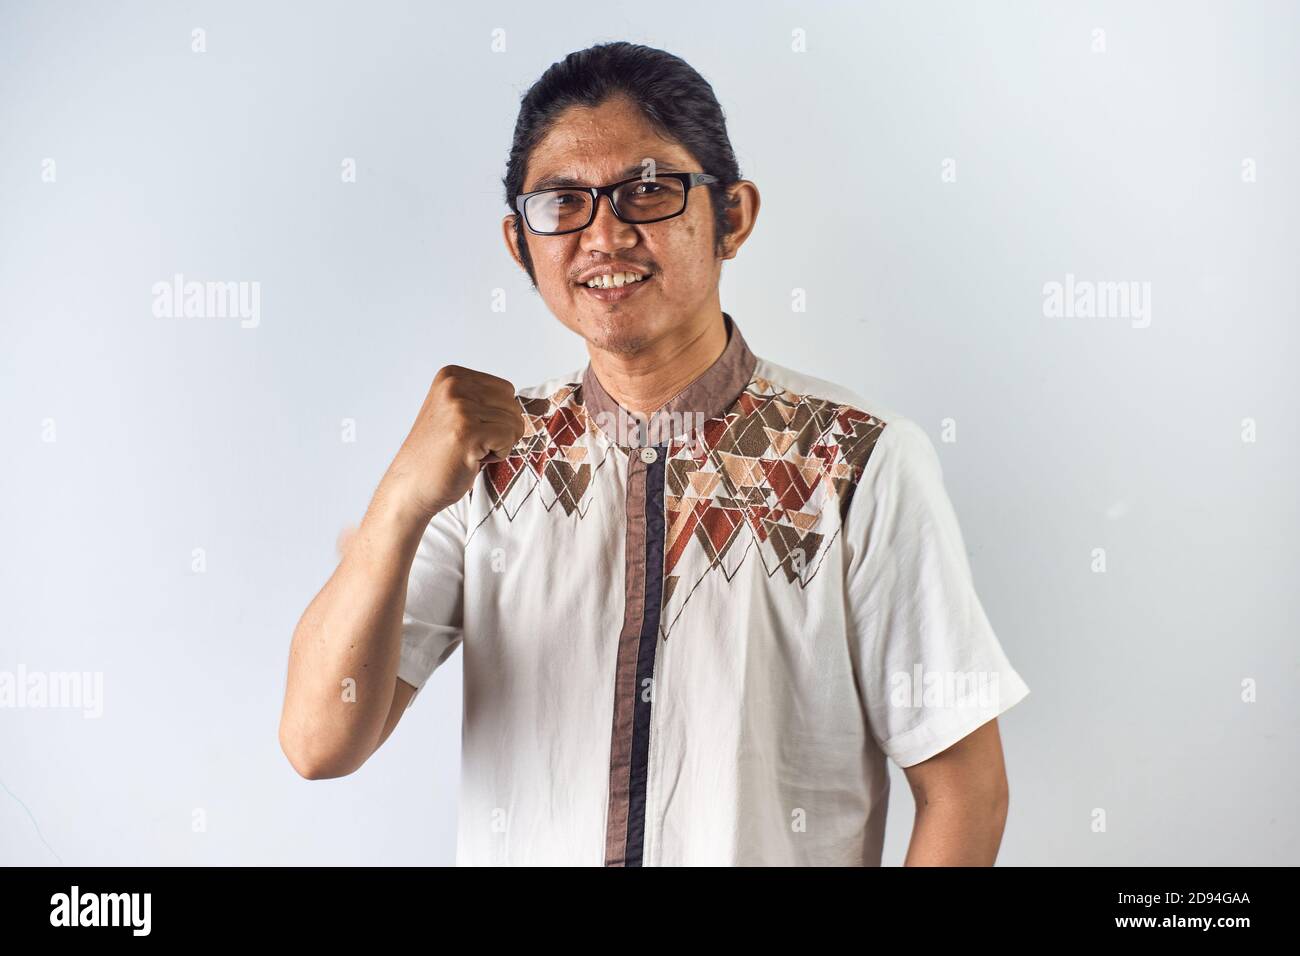 Potrait of asian man with confident, smiling and relaxed pose. on white background Stock Photo